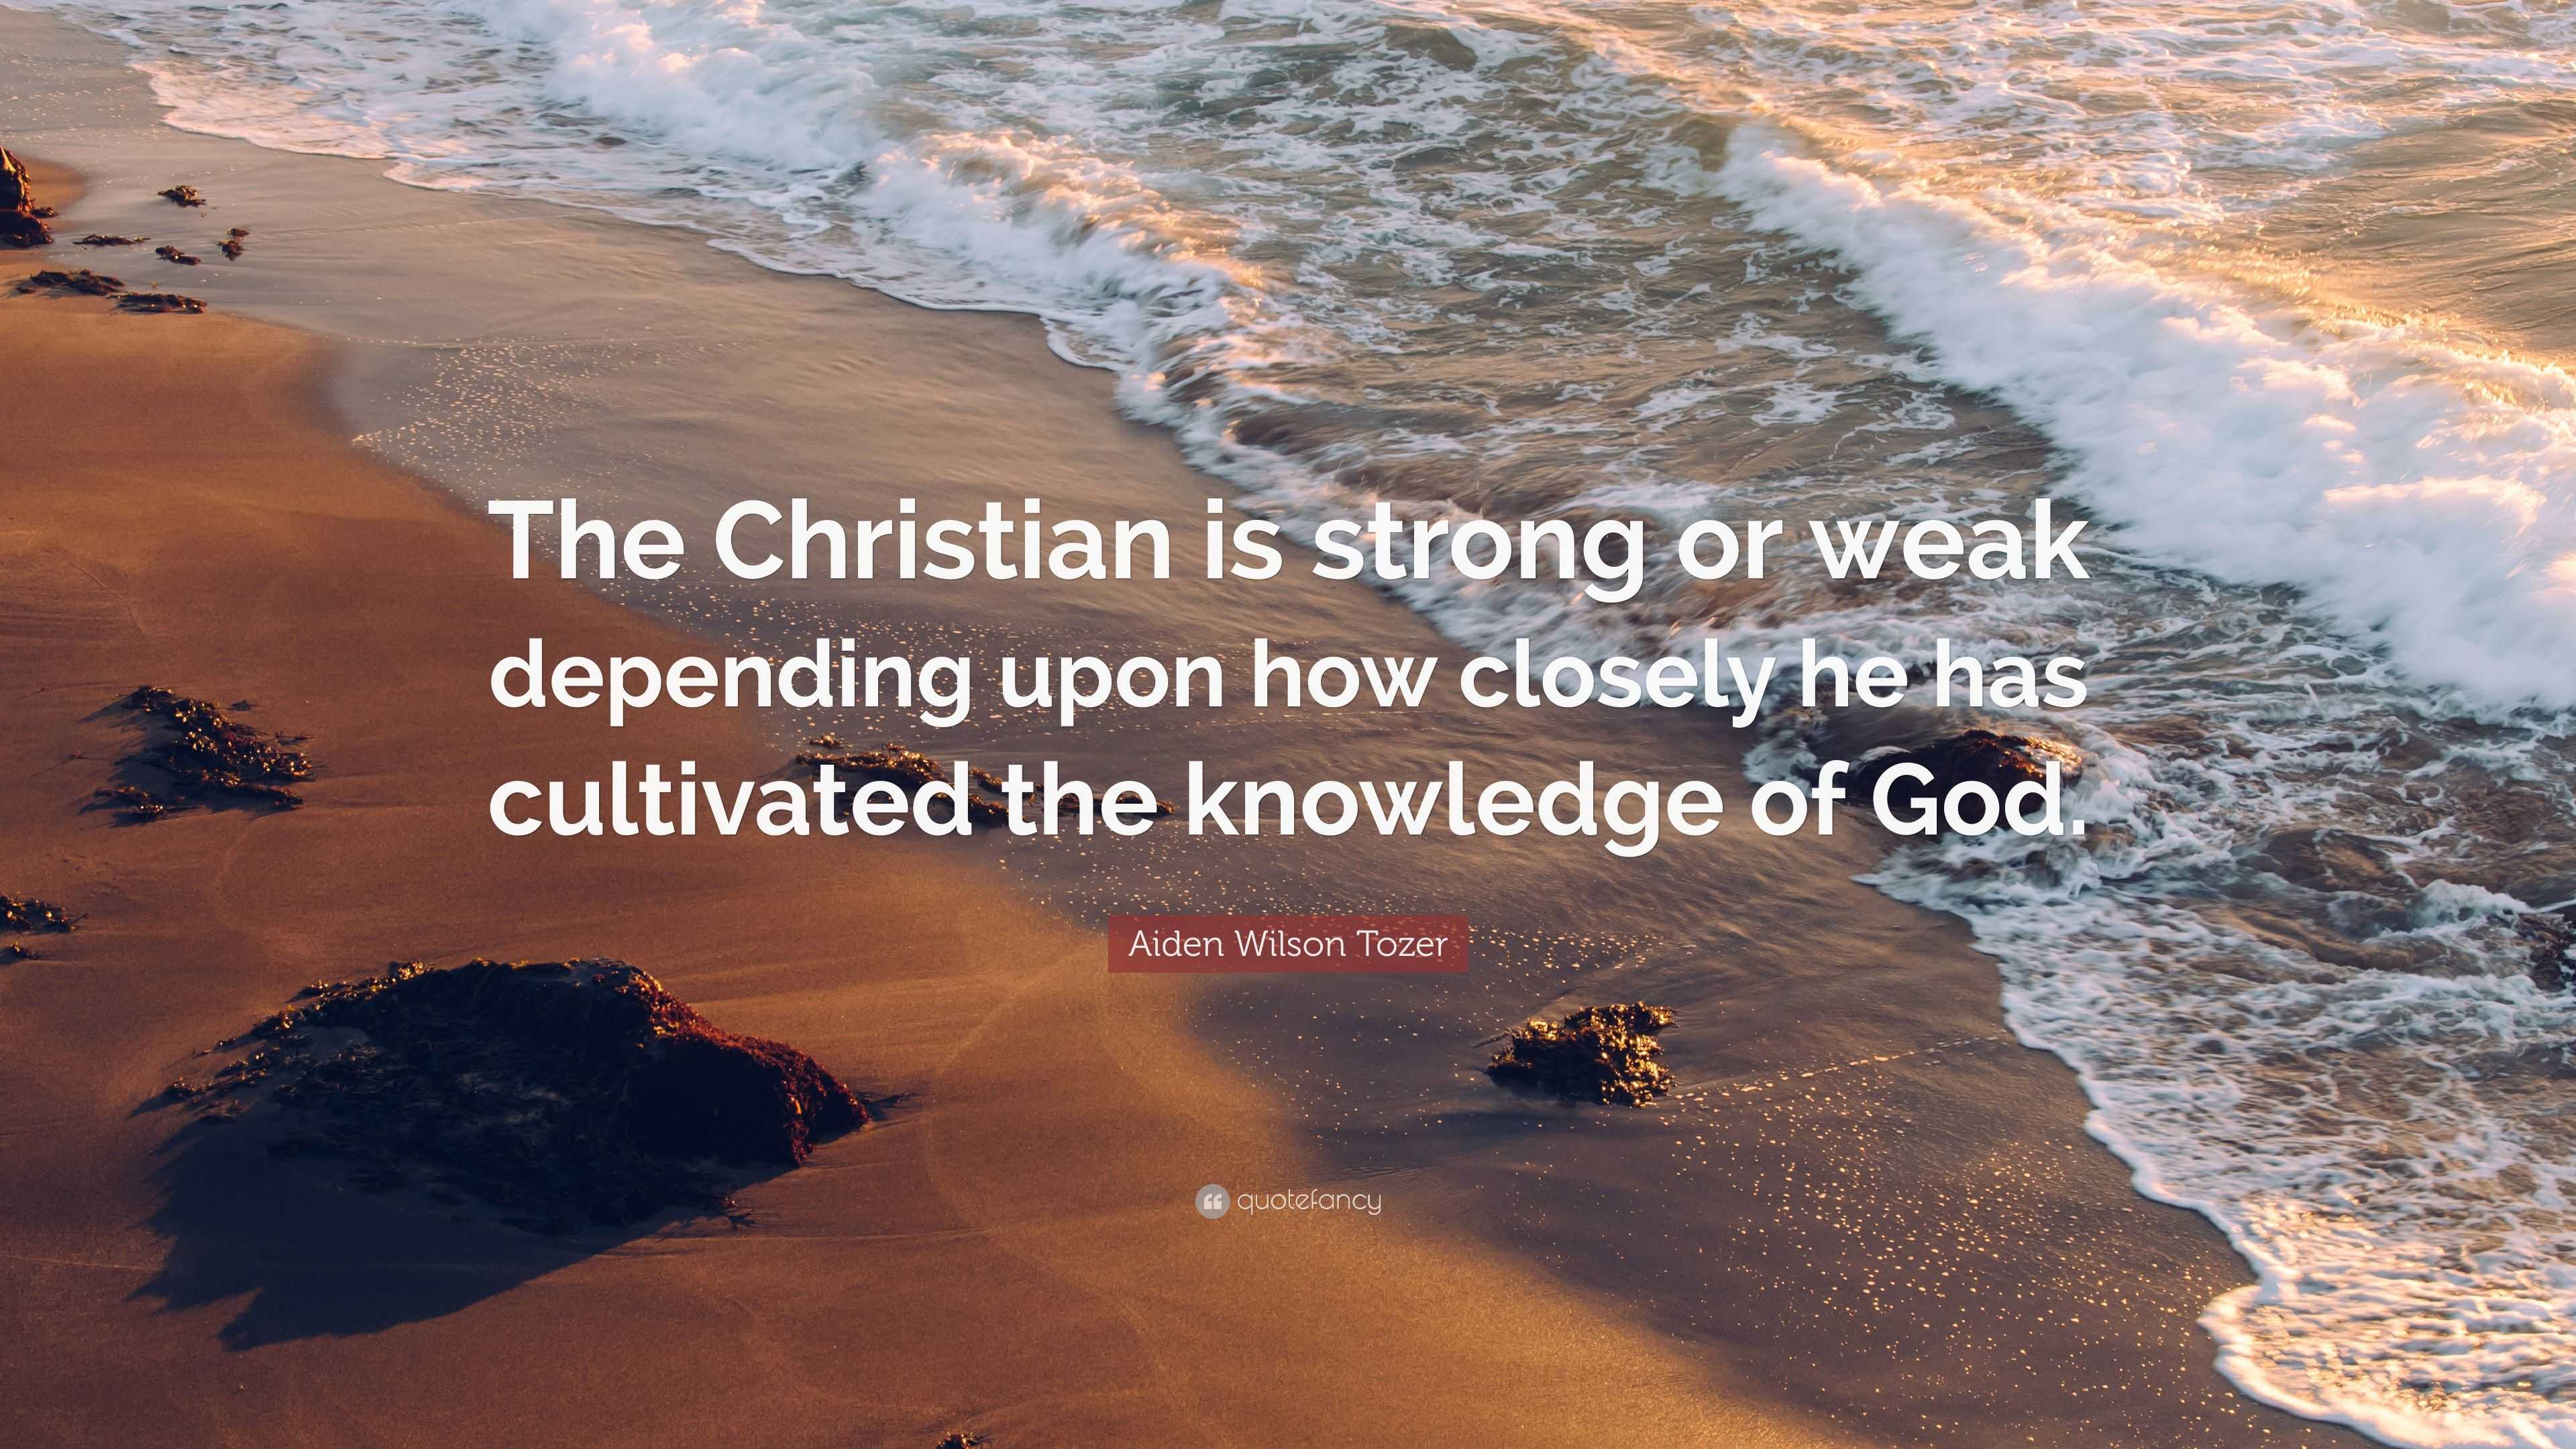 Aiden Wilson Tozer Quote: “The Christian is strong or weak depending ...